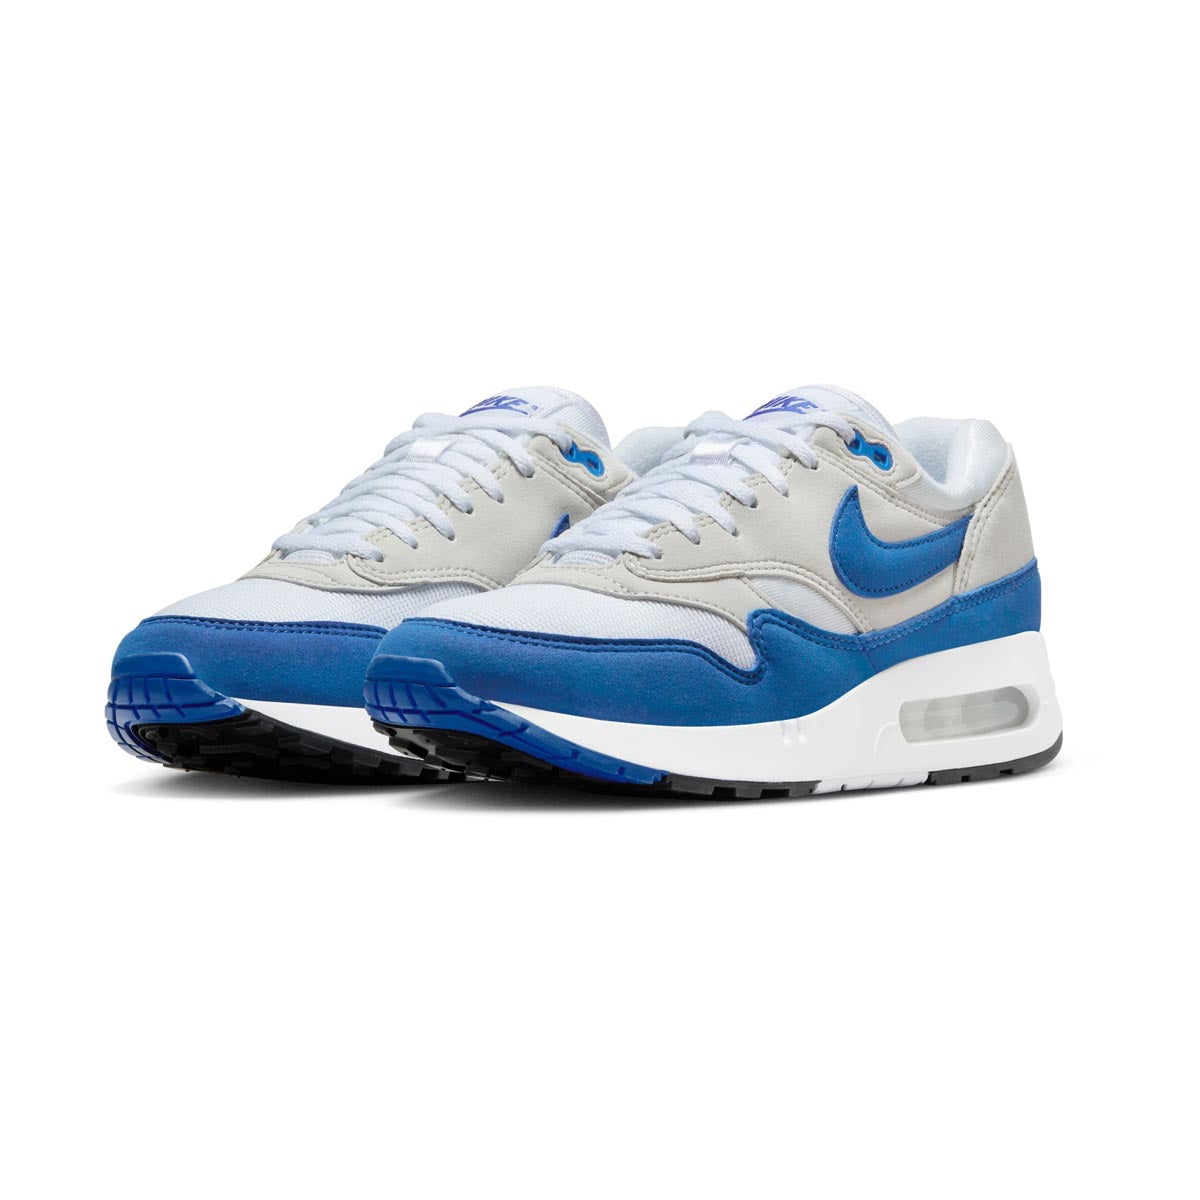 nike outlet Air Max 1 '86 Premium Women's Shoes